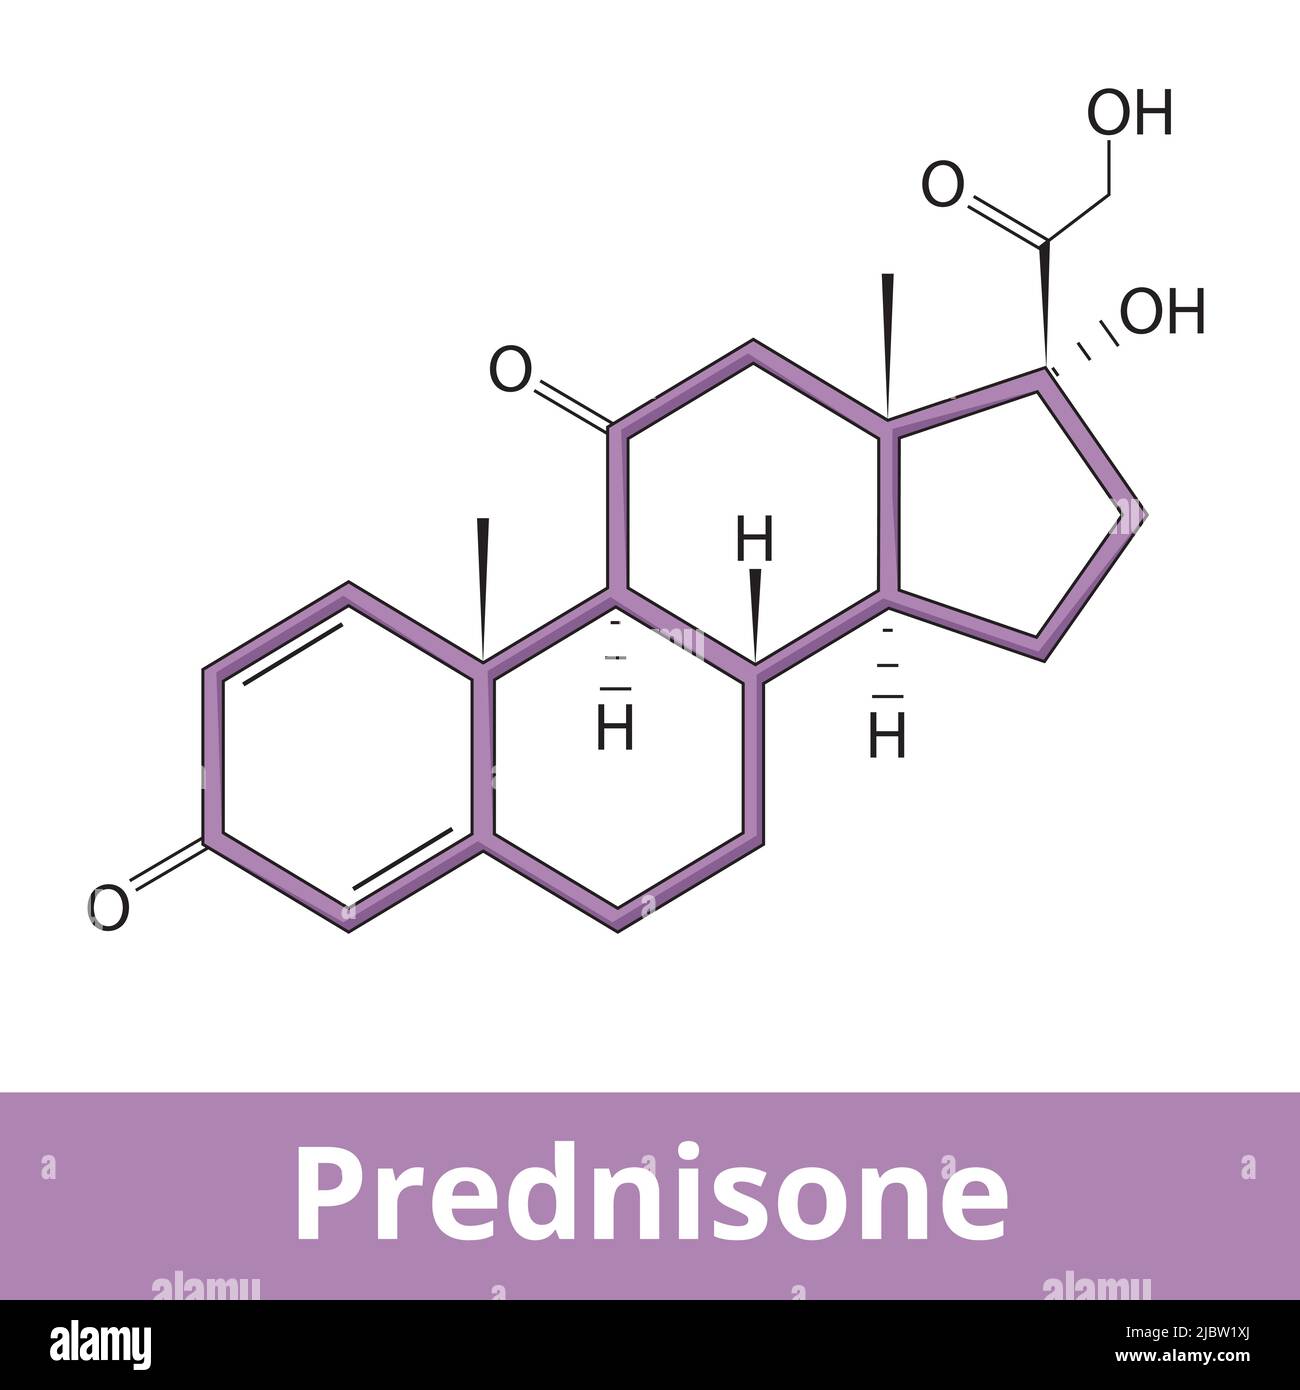 Chemical structure of prednisone. Prednisone is a corticosteroid medicine used to decrease inflammation and keep immune system in check Stock Vector